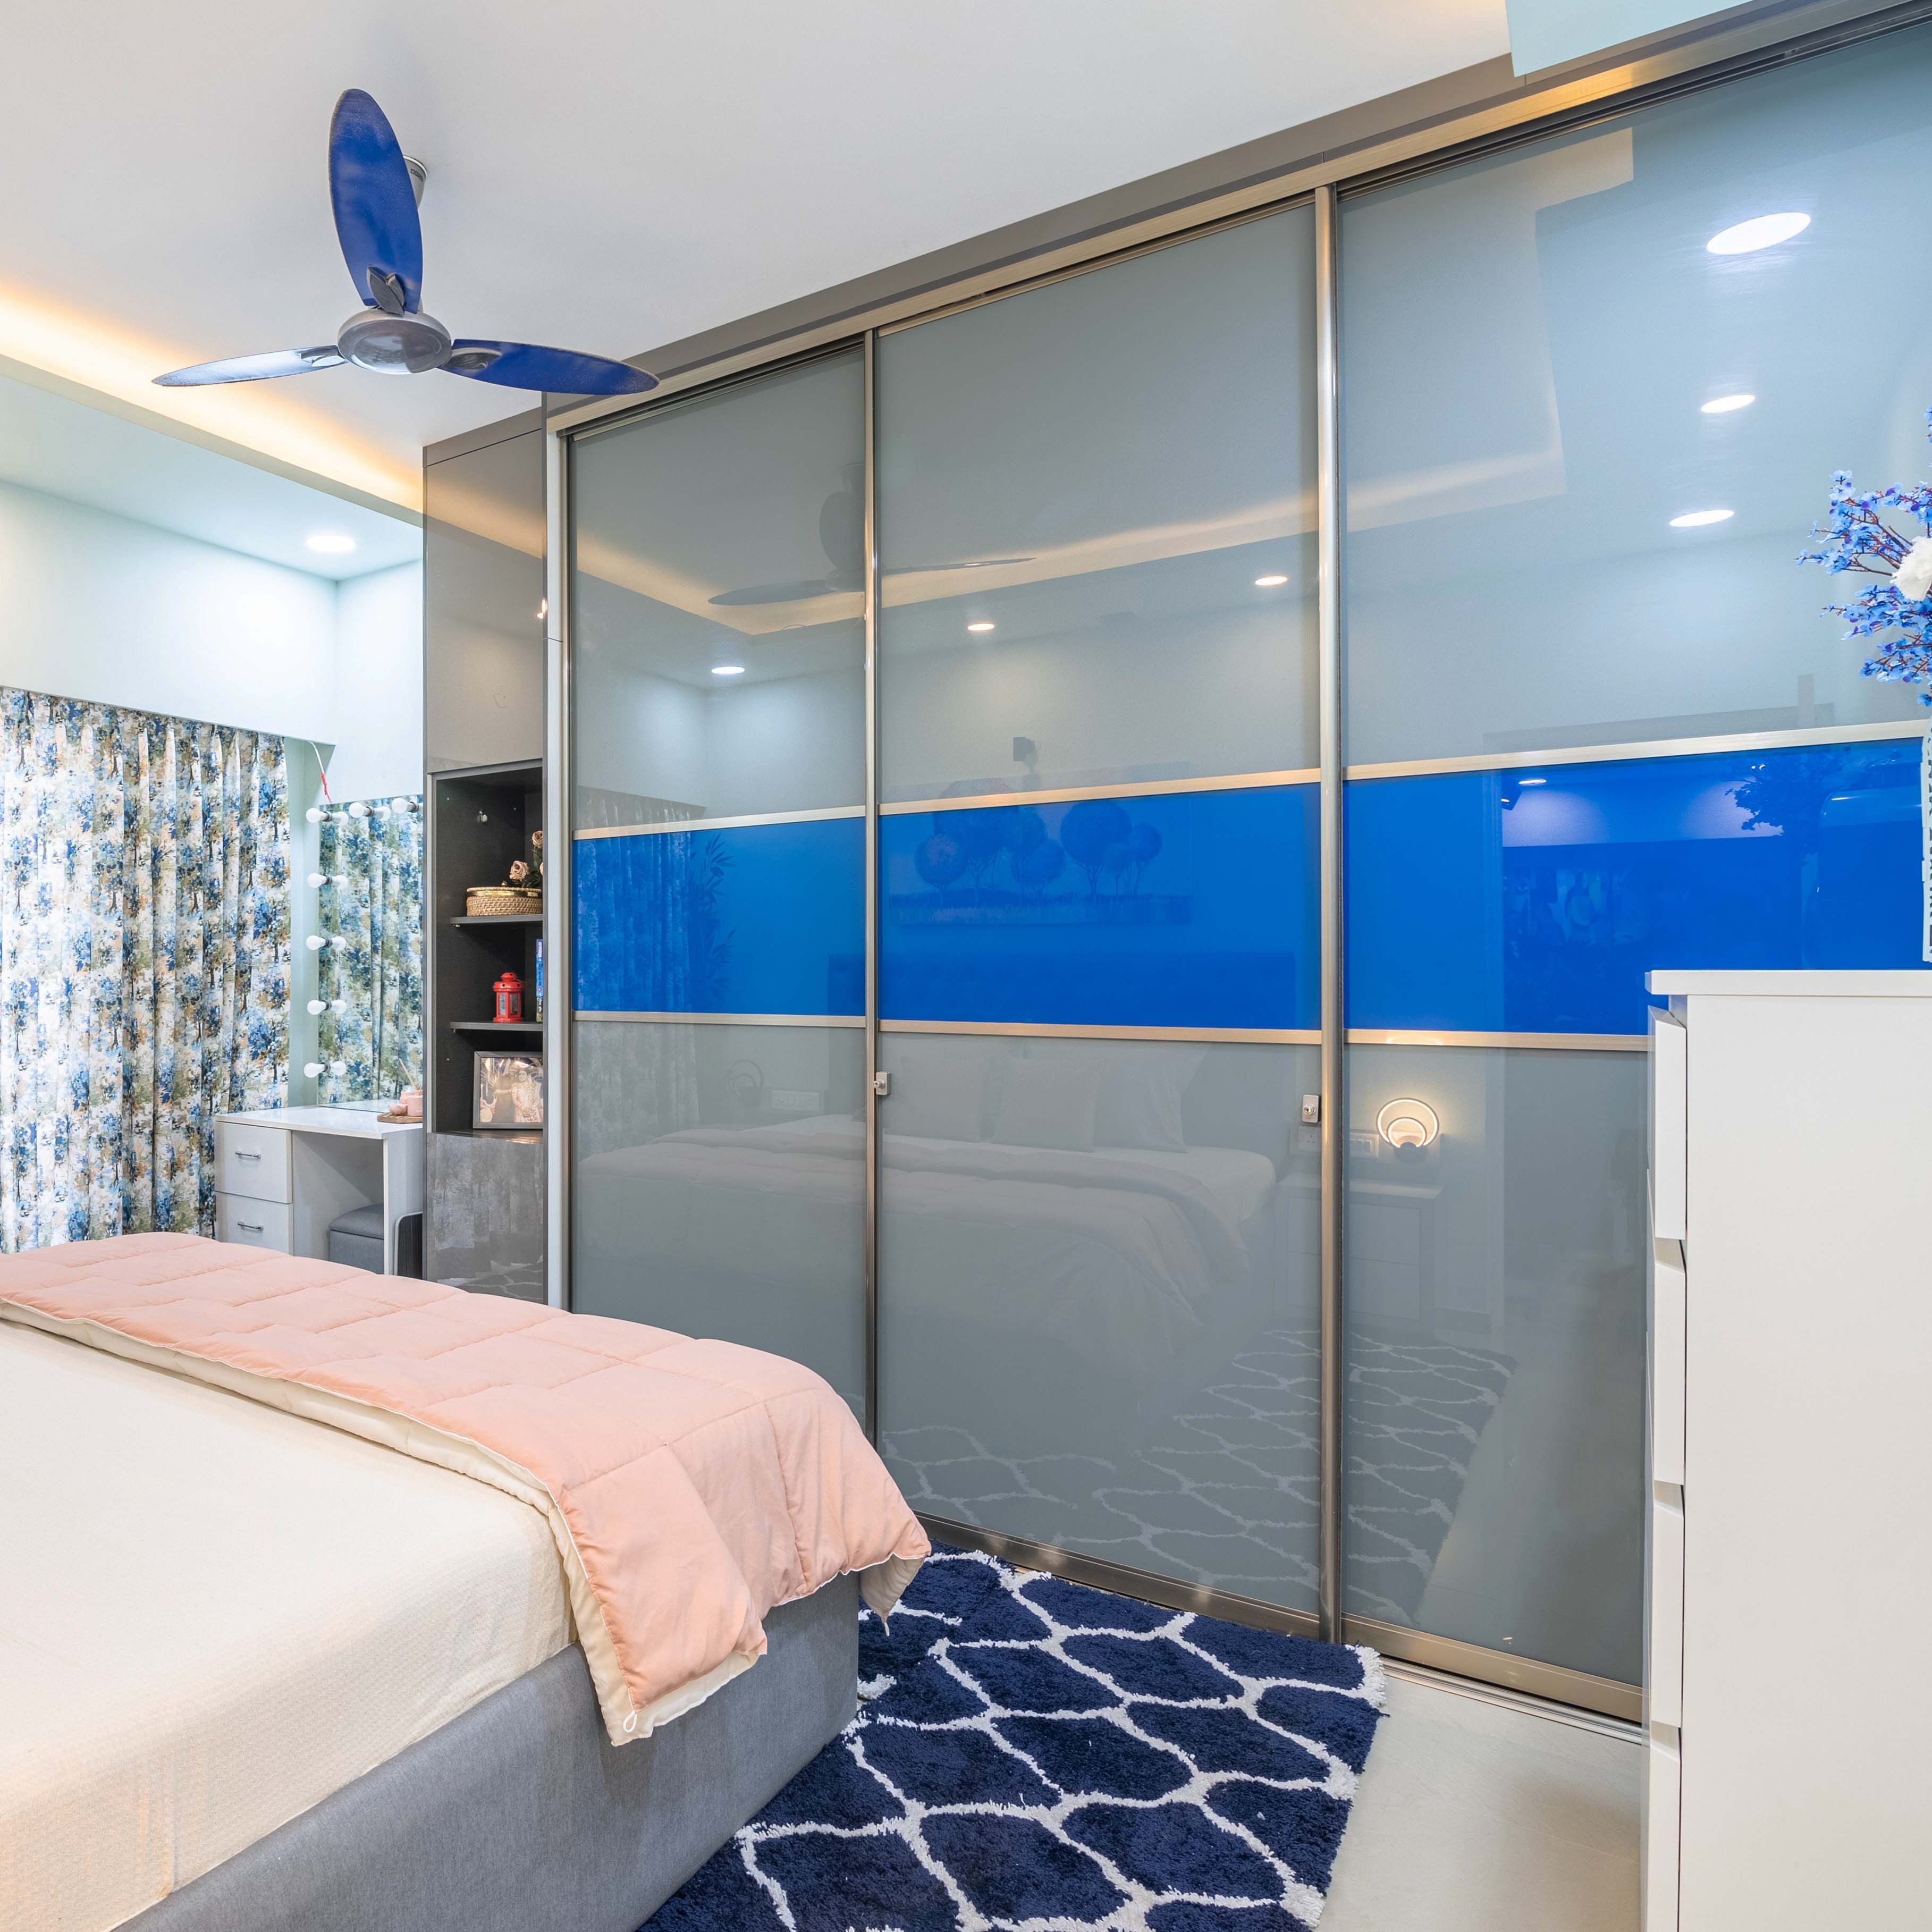 Contemporary Sliding Door Wardrobe Design With Silver Frost And Blue Danube Shutters